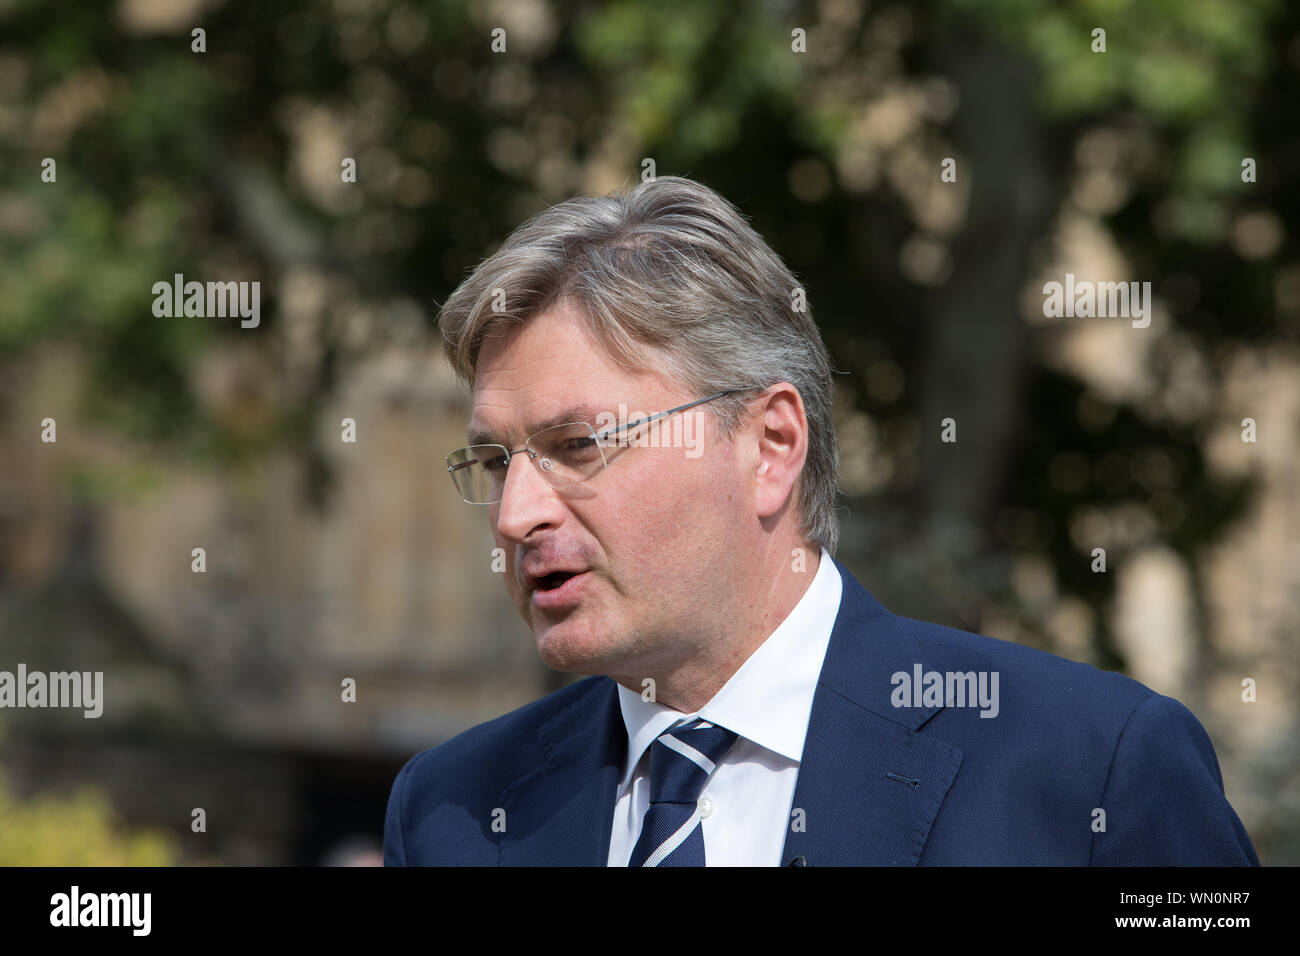 Westminster, London, 5 September 2019. Daniel Kawczynski, Conservative part in media interviews in College Green. No-Deal Brexit struggle as Boris Johnson's suspension of Parliament for five weeks is challenged